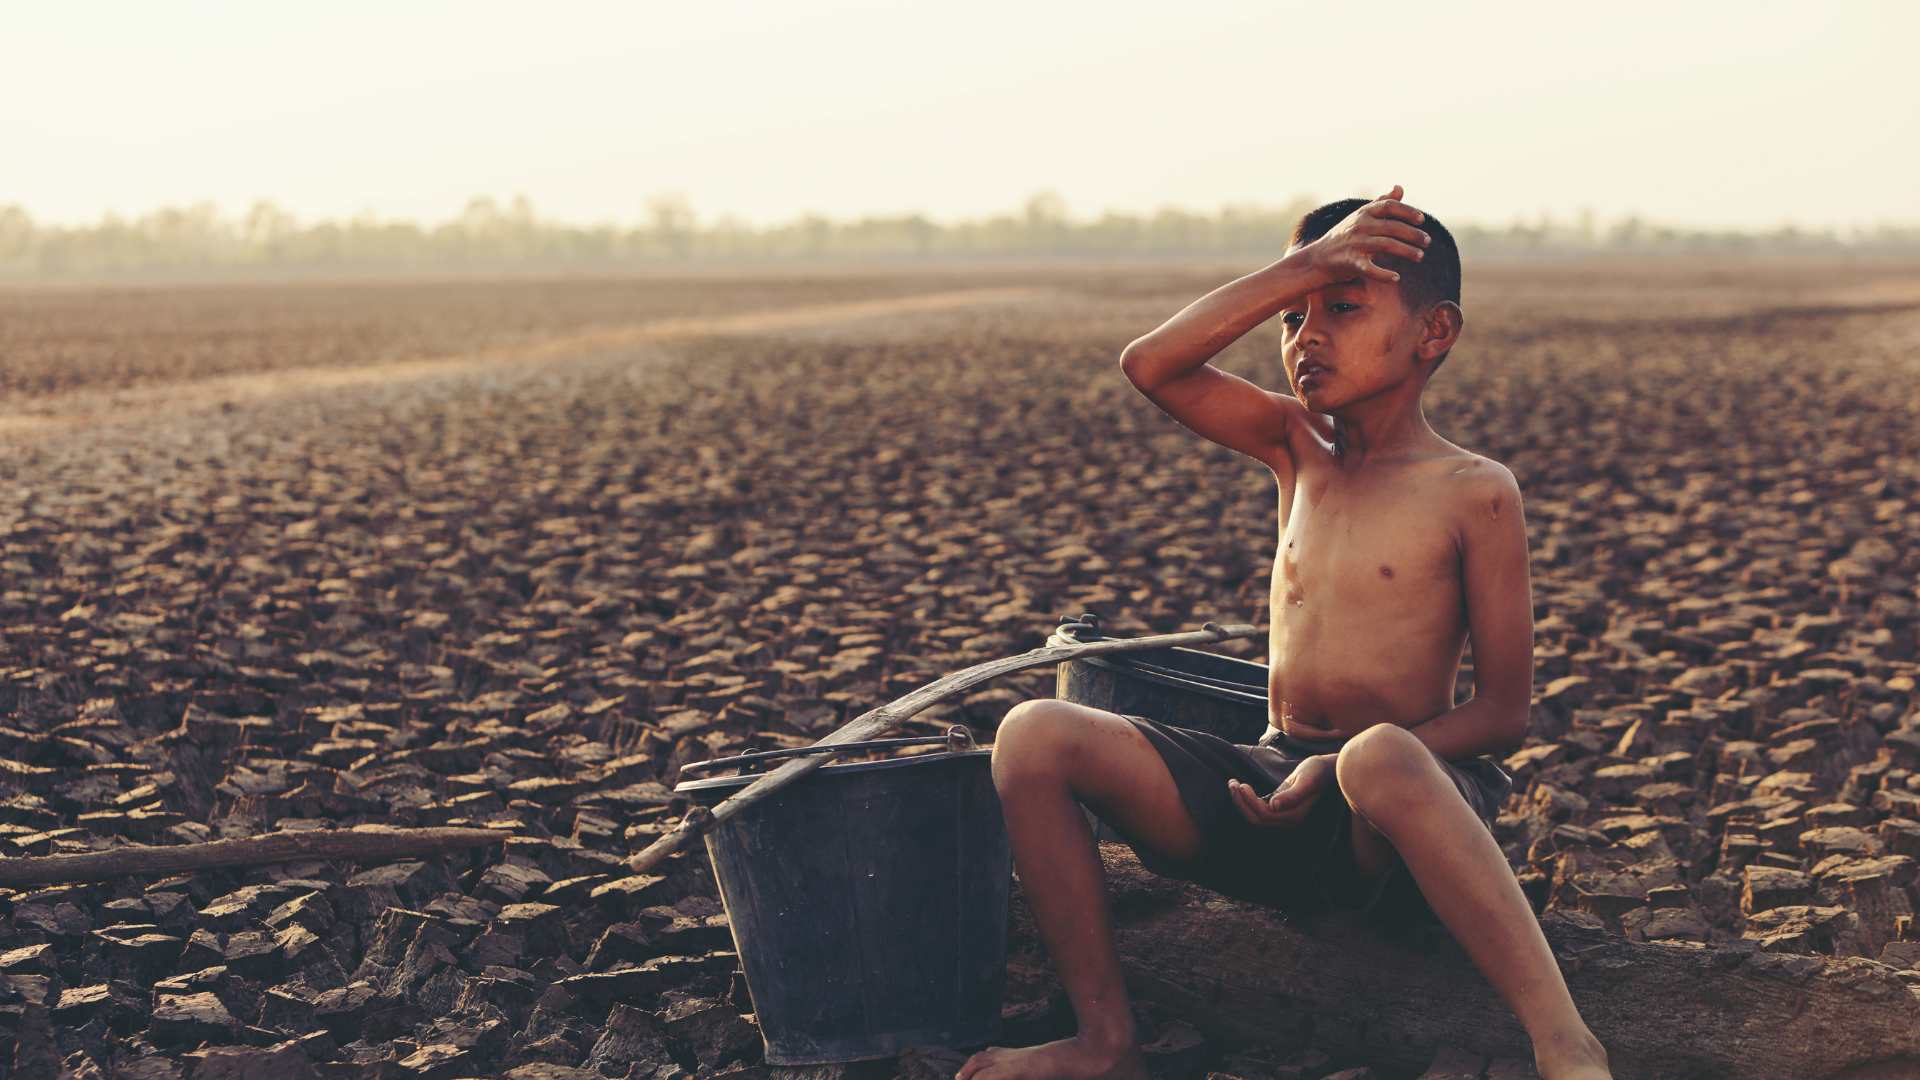 Deadly heatwaves threaten to reverse India’s progress on poverty and inequality – new research